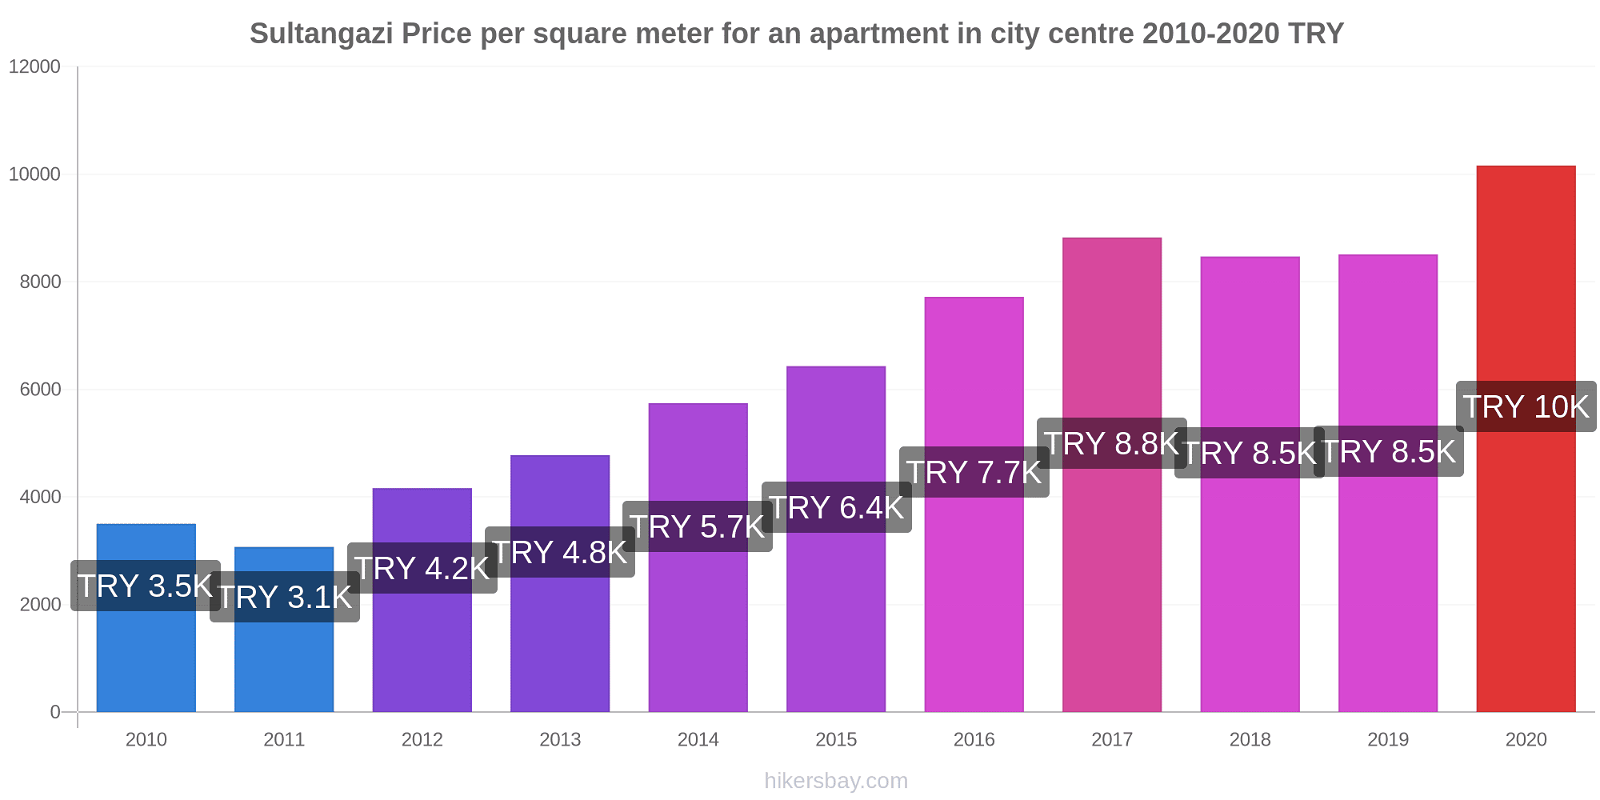 Sultangazi price changes Price per square meter for an apartment in city centre hikersbay.com